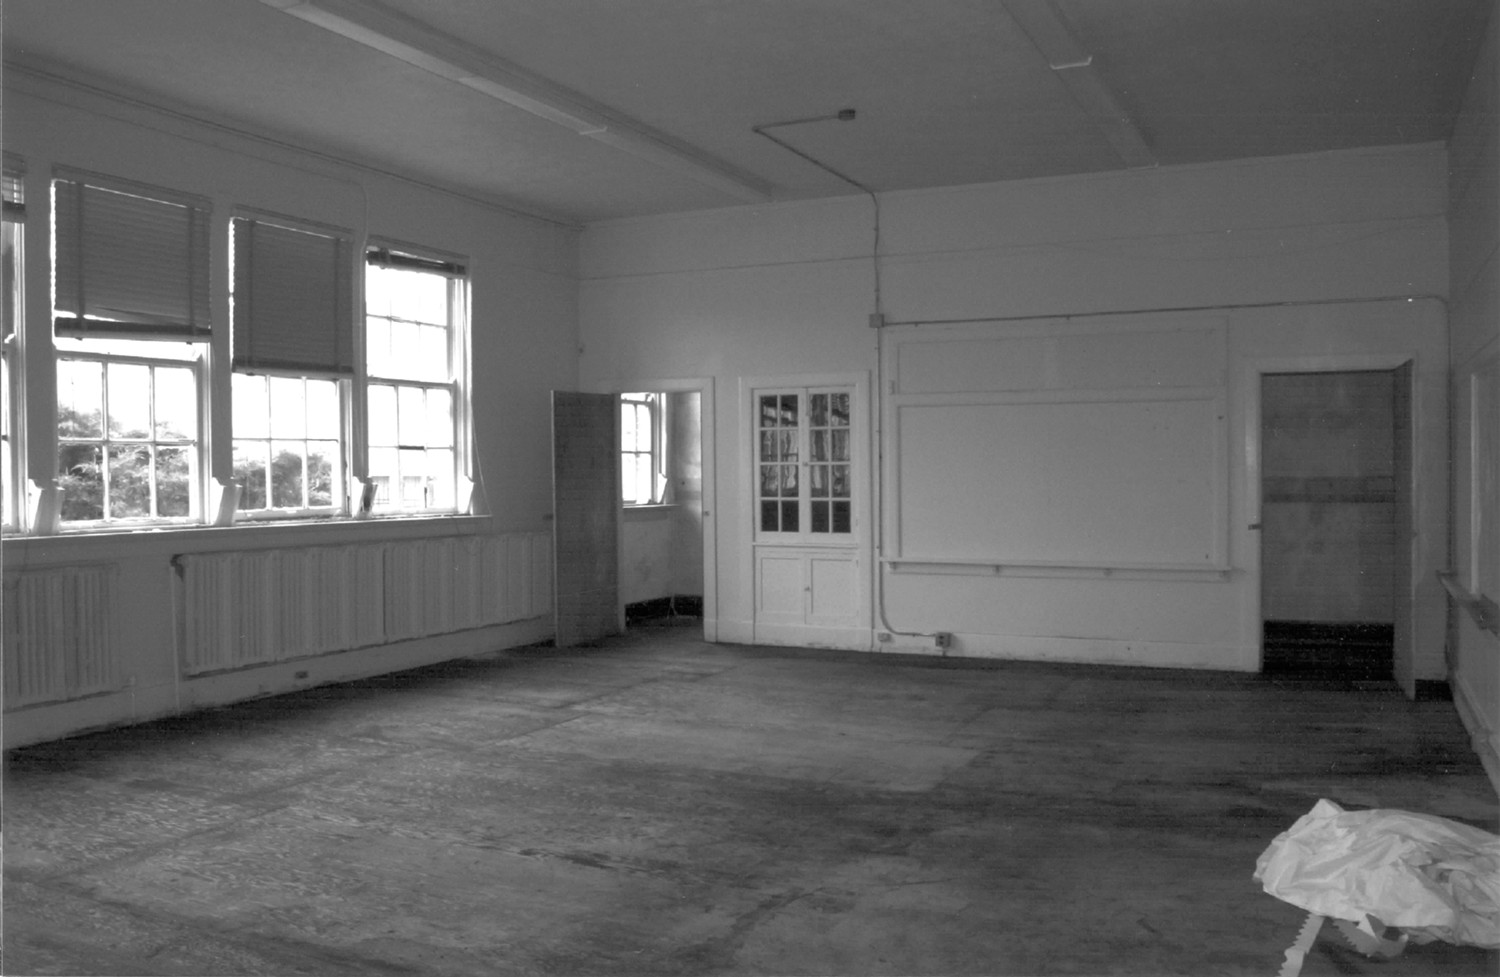 Lorena Duling School, Jackson Mississippi 1927 Section, 1<sup>st</sup> Floor, Classroom 1, Looking Northwest (2007)